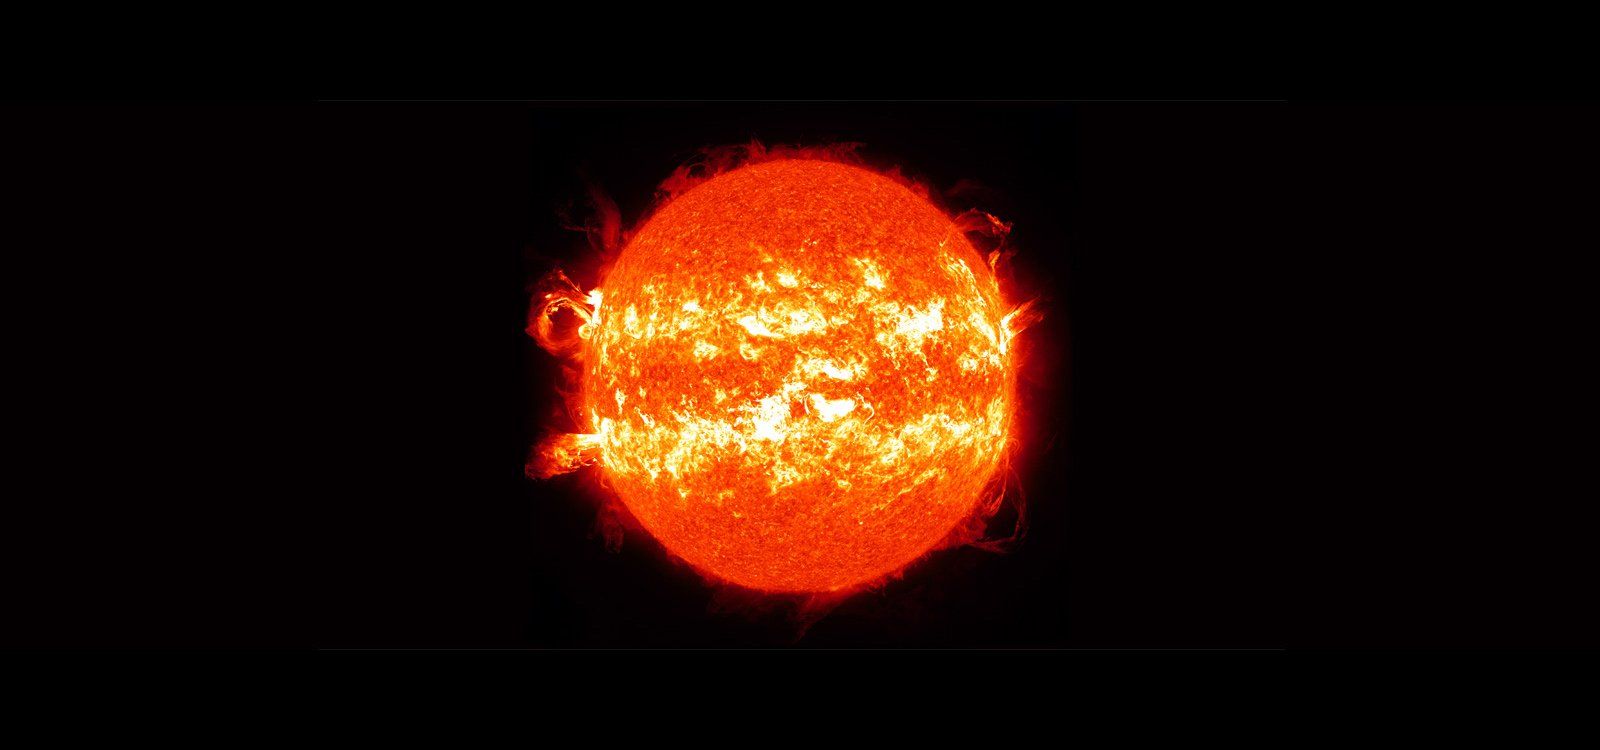 Coronal mass ejection from the Sun, image courtesy of NASA/SDO and the AIA, EVE and HMI science teams. NASA's Goddard Space Flight CenterSDOS. Wiessinger